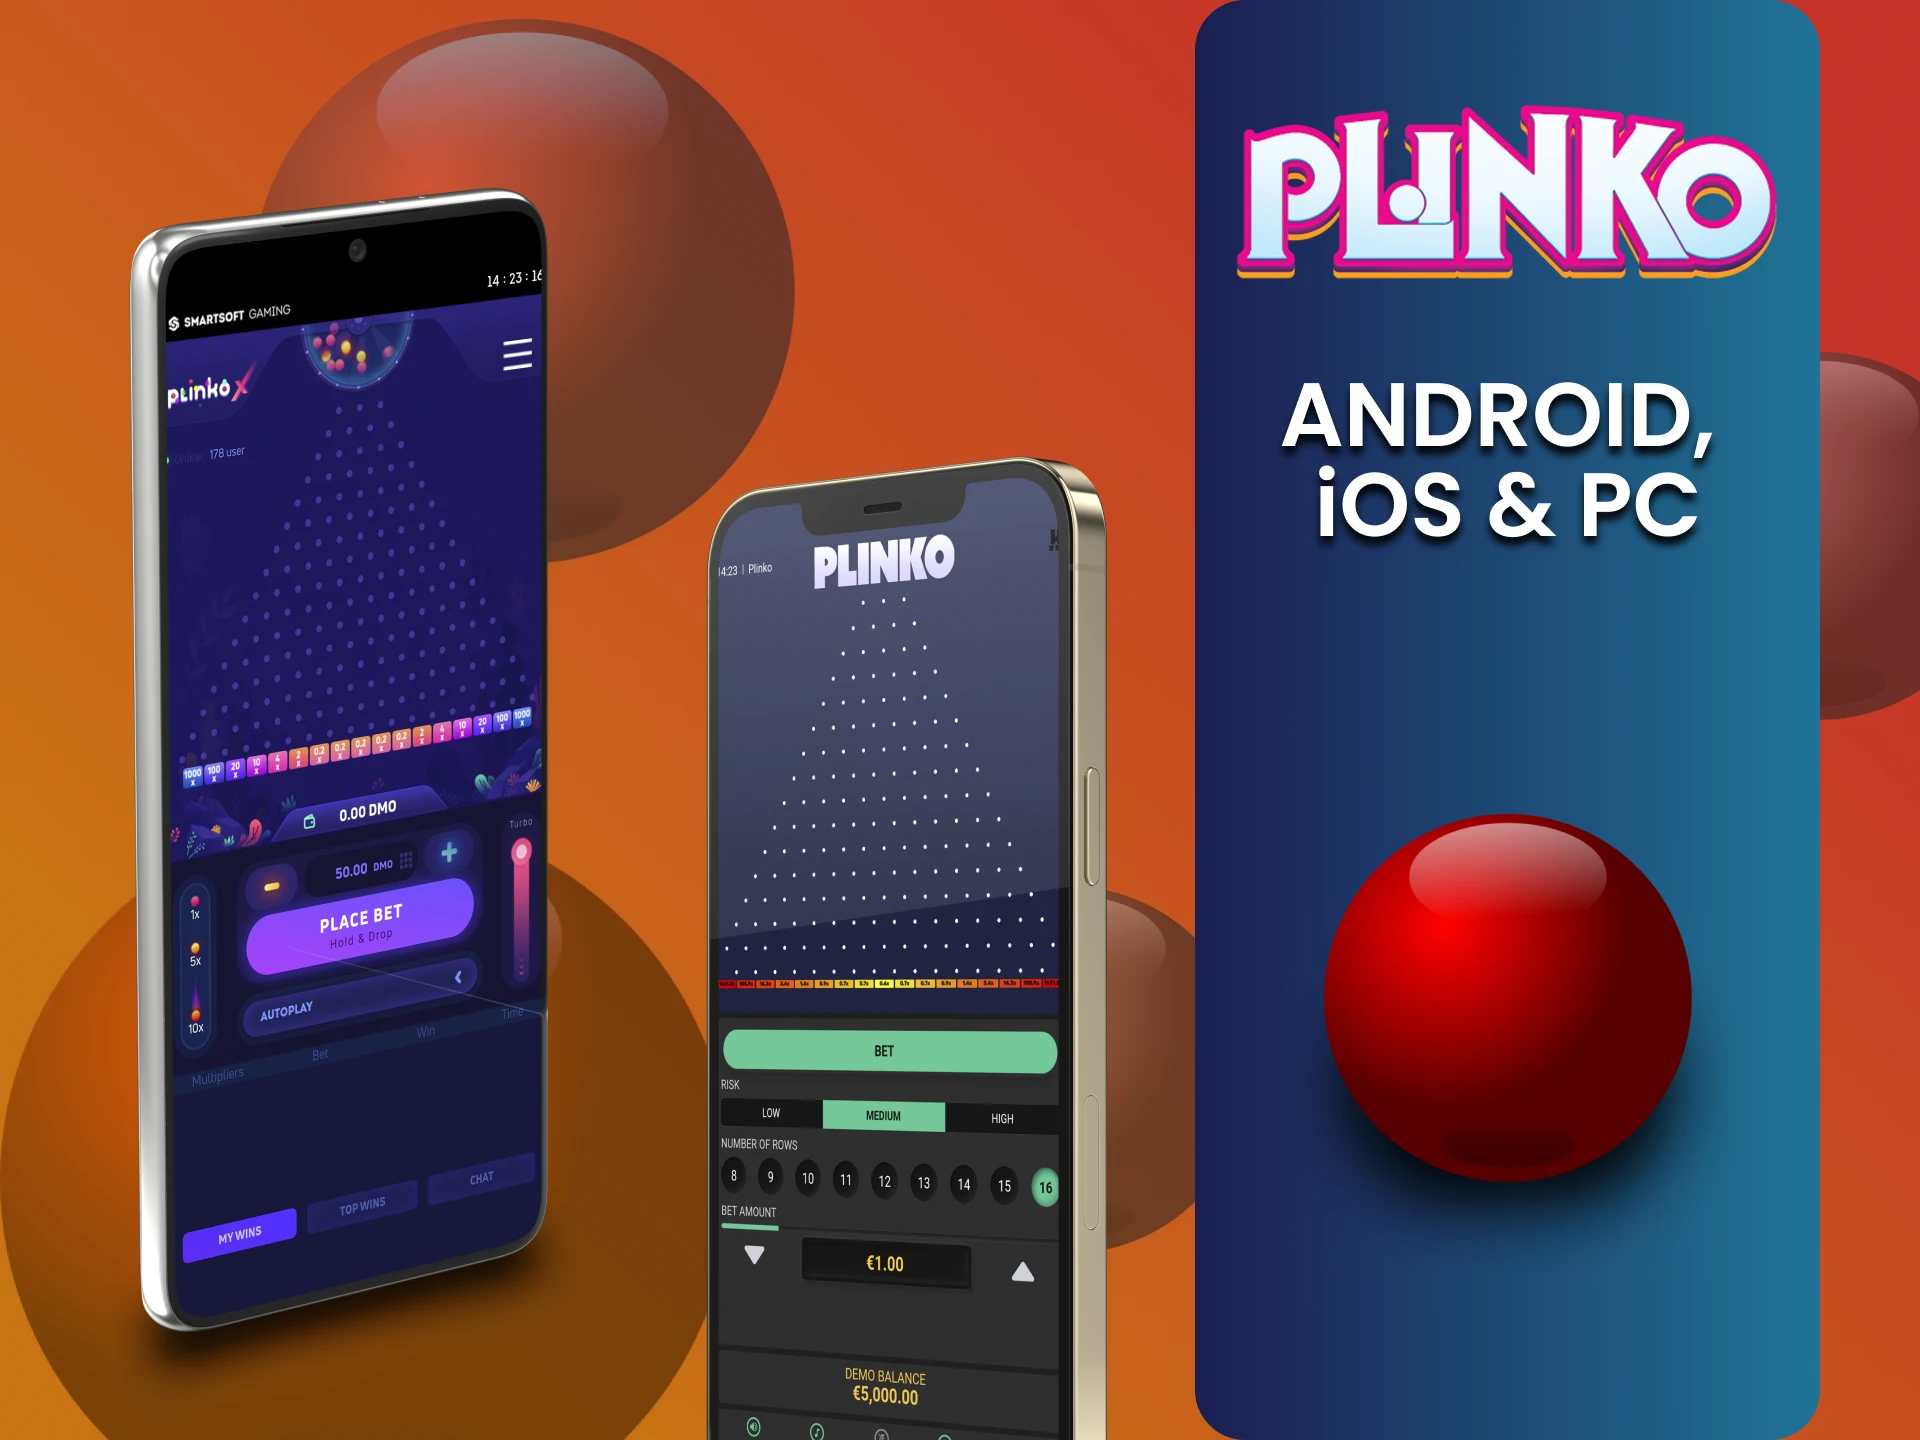 Download the app on one of your devices to play Plinko.